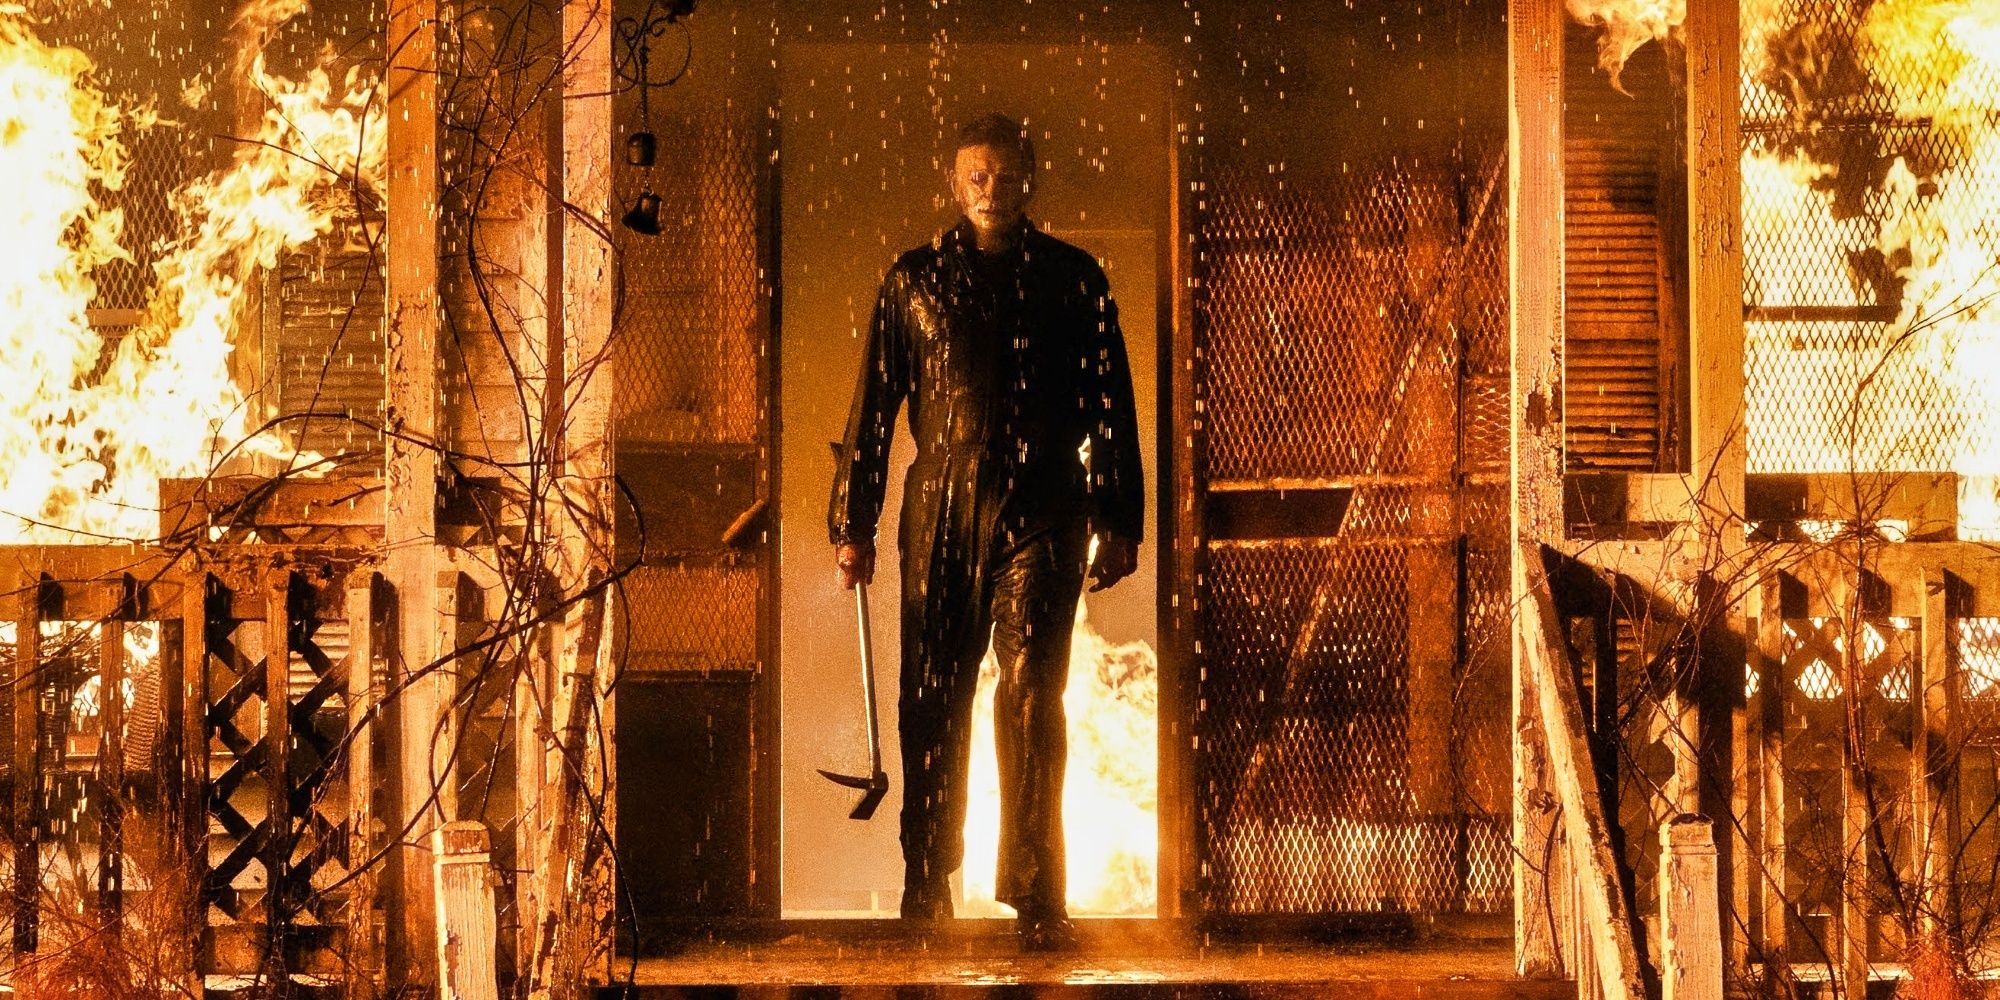 Michael Myers walks out of a burning house